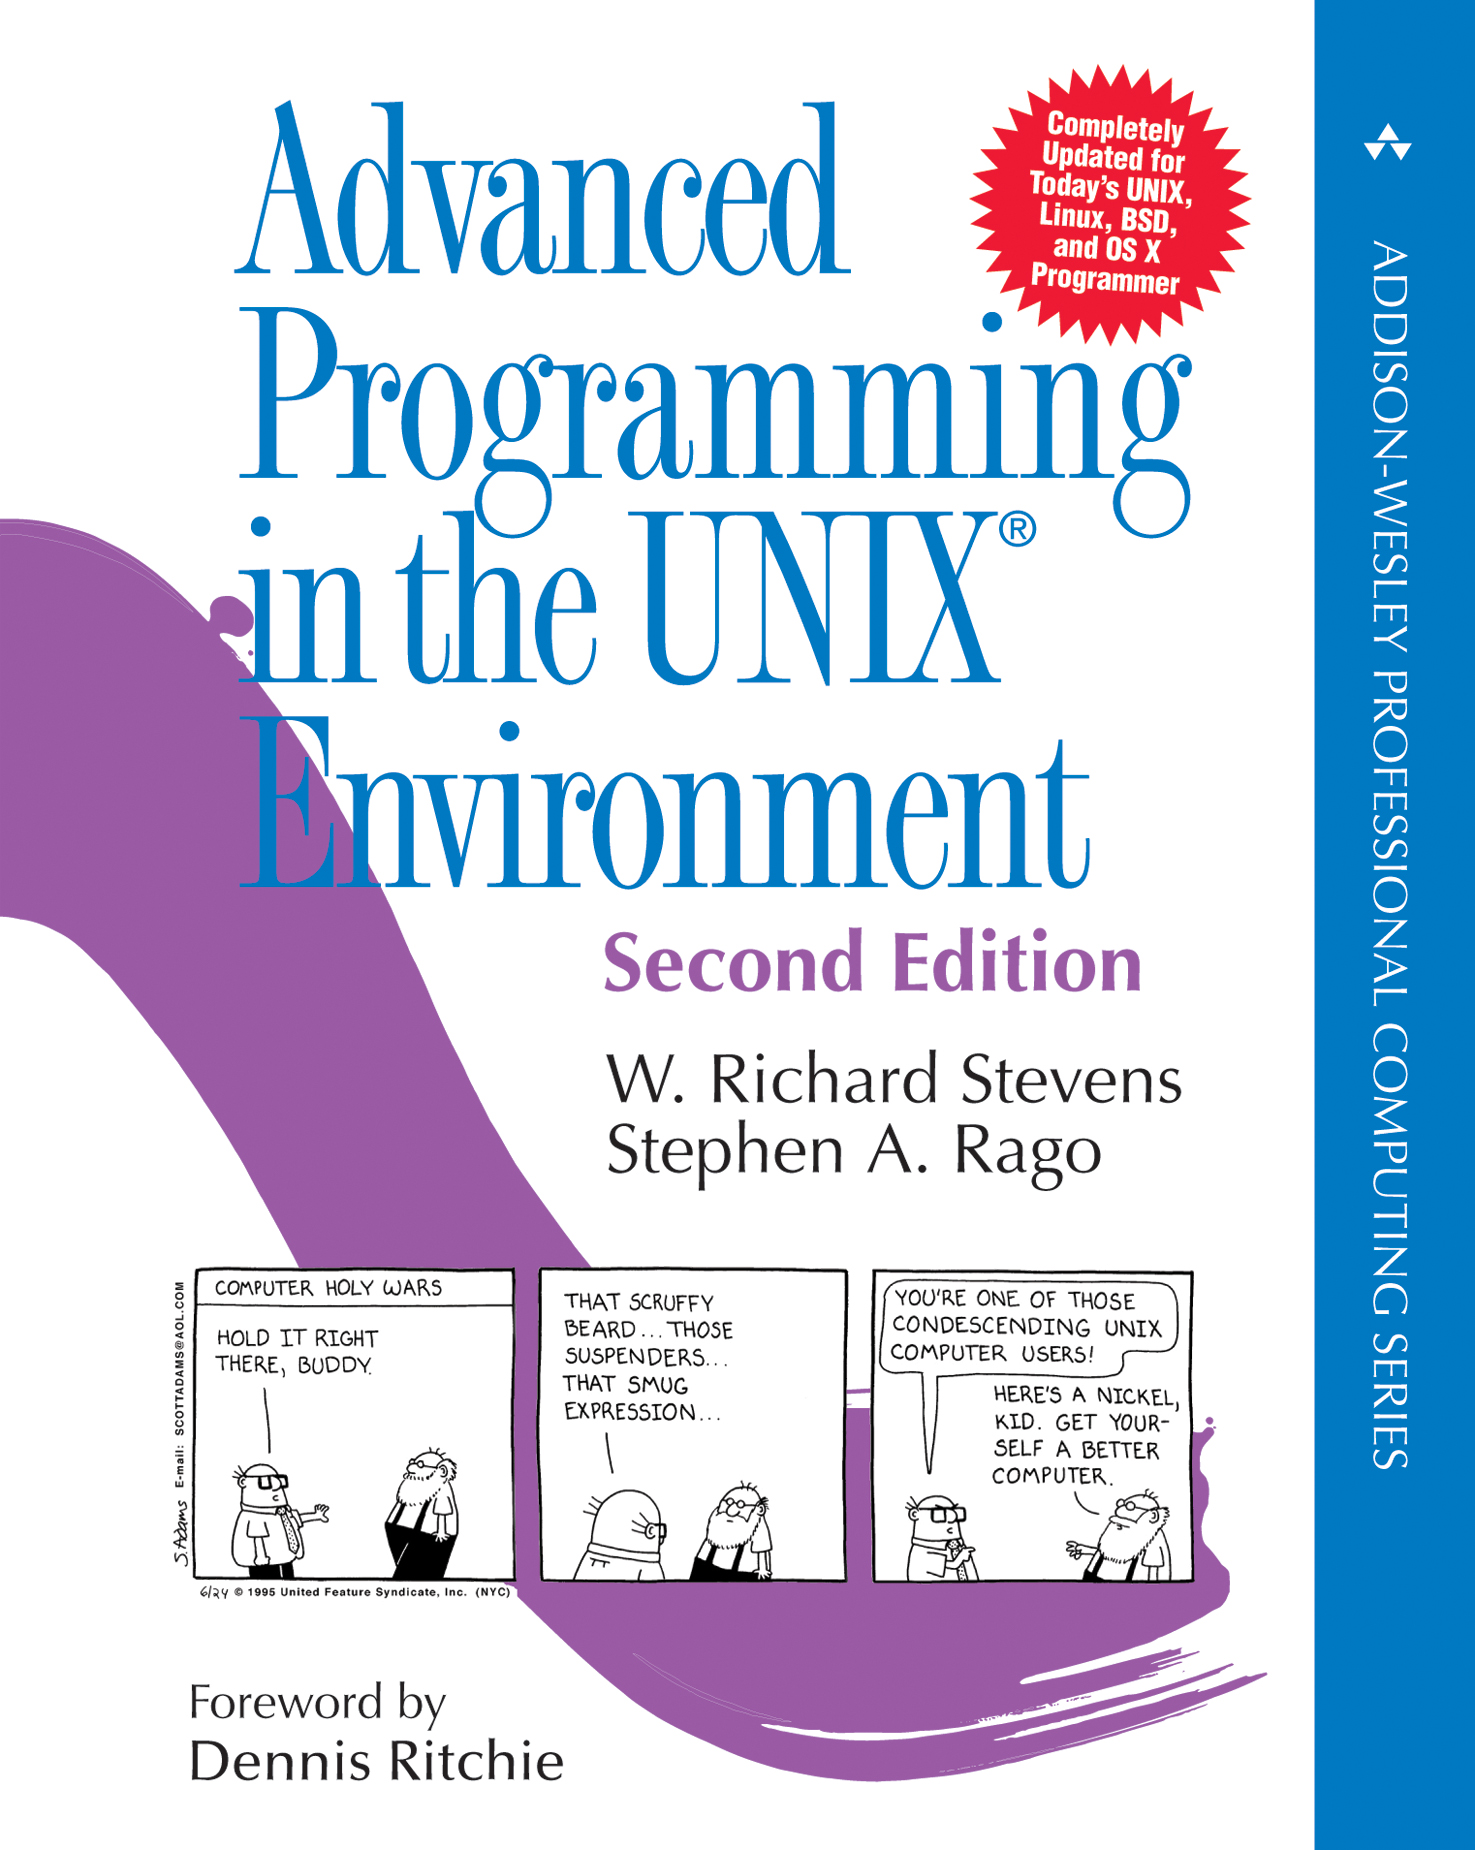 Advanced programming in the unix environment 2nd edition 2017 pdf